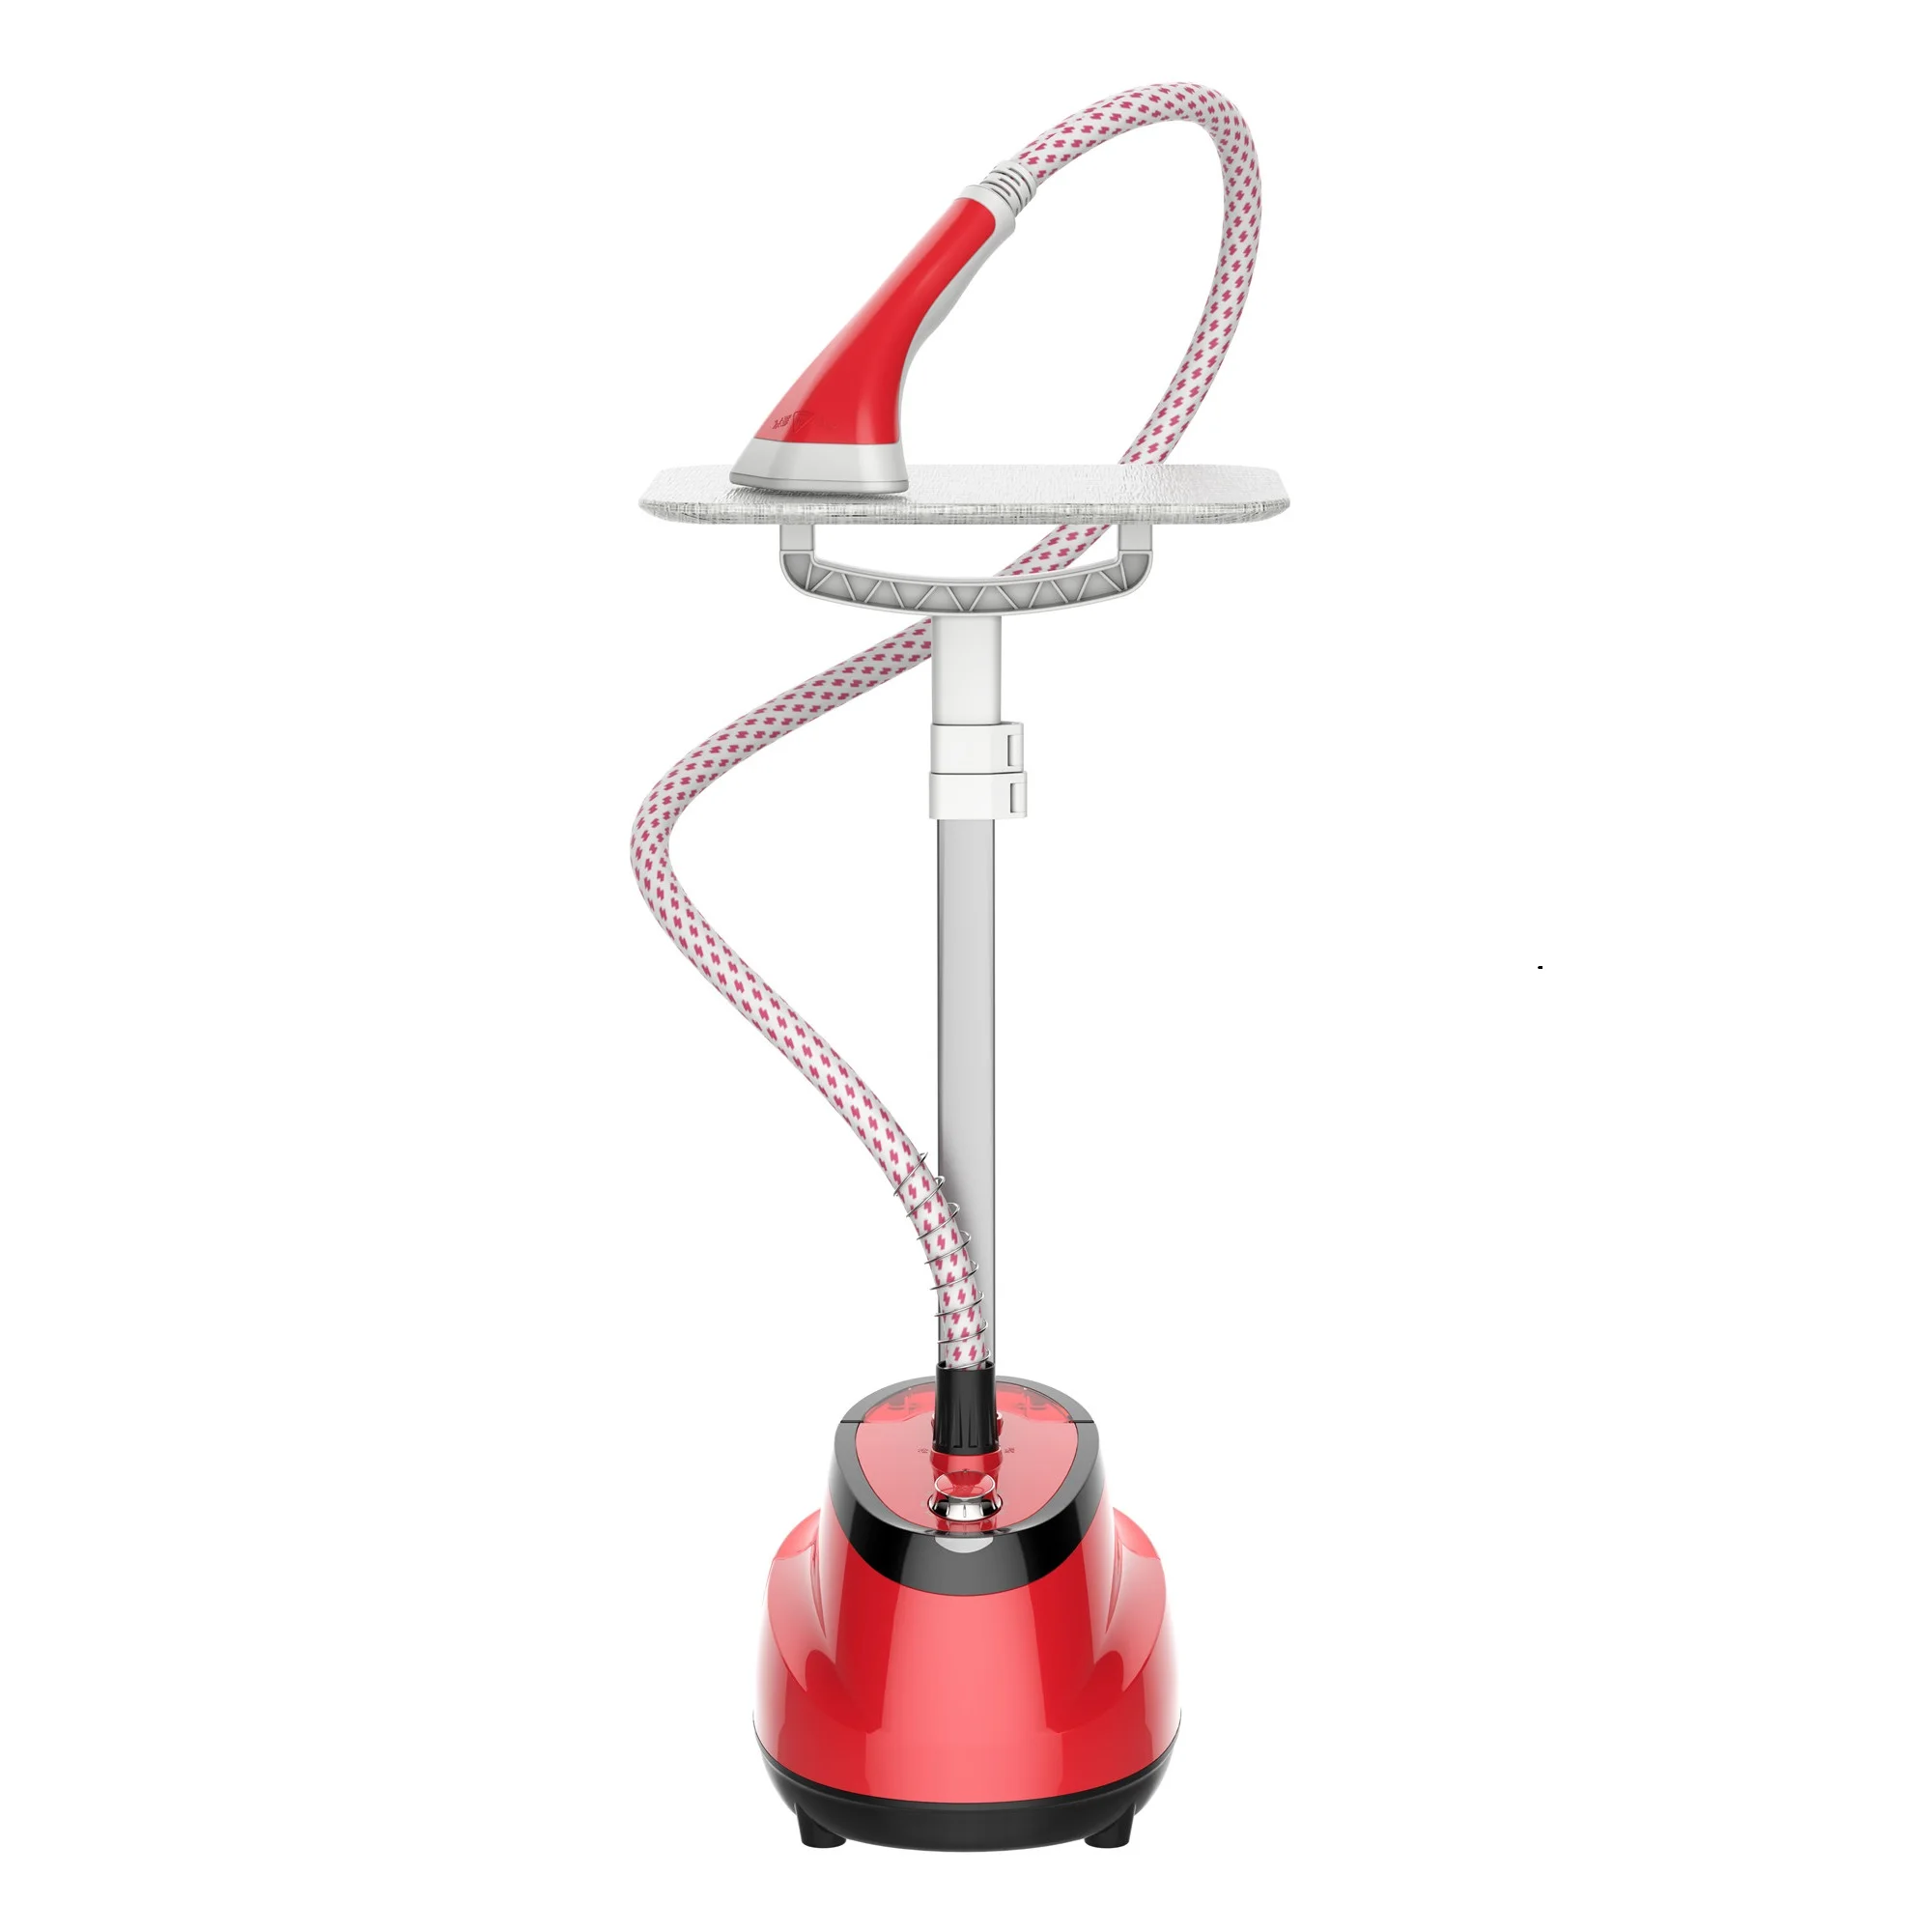 

2022 Single Pole Hanging Ironing Flat Ironing Garment Steamer Double row ten hole Heat Insulation Sprinkler Clothes Steamers